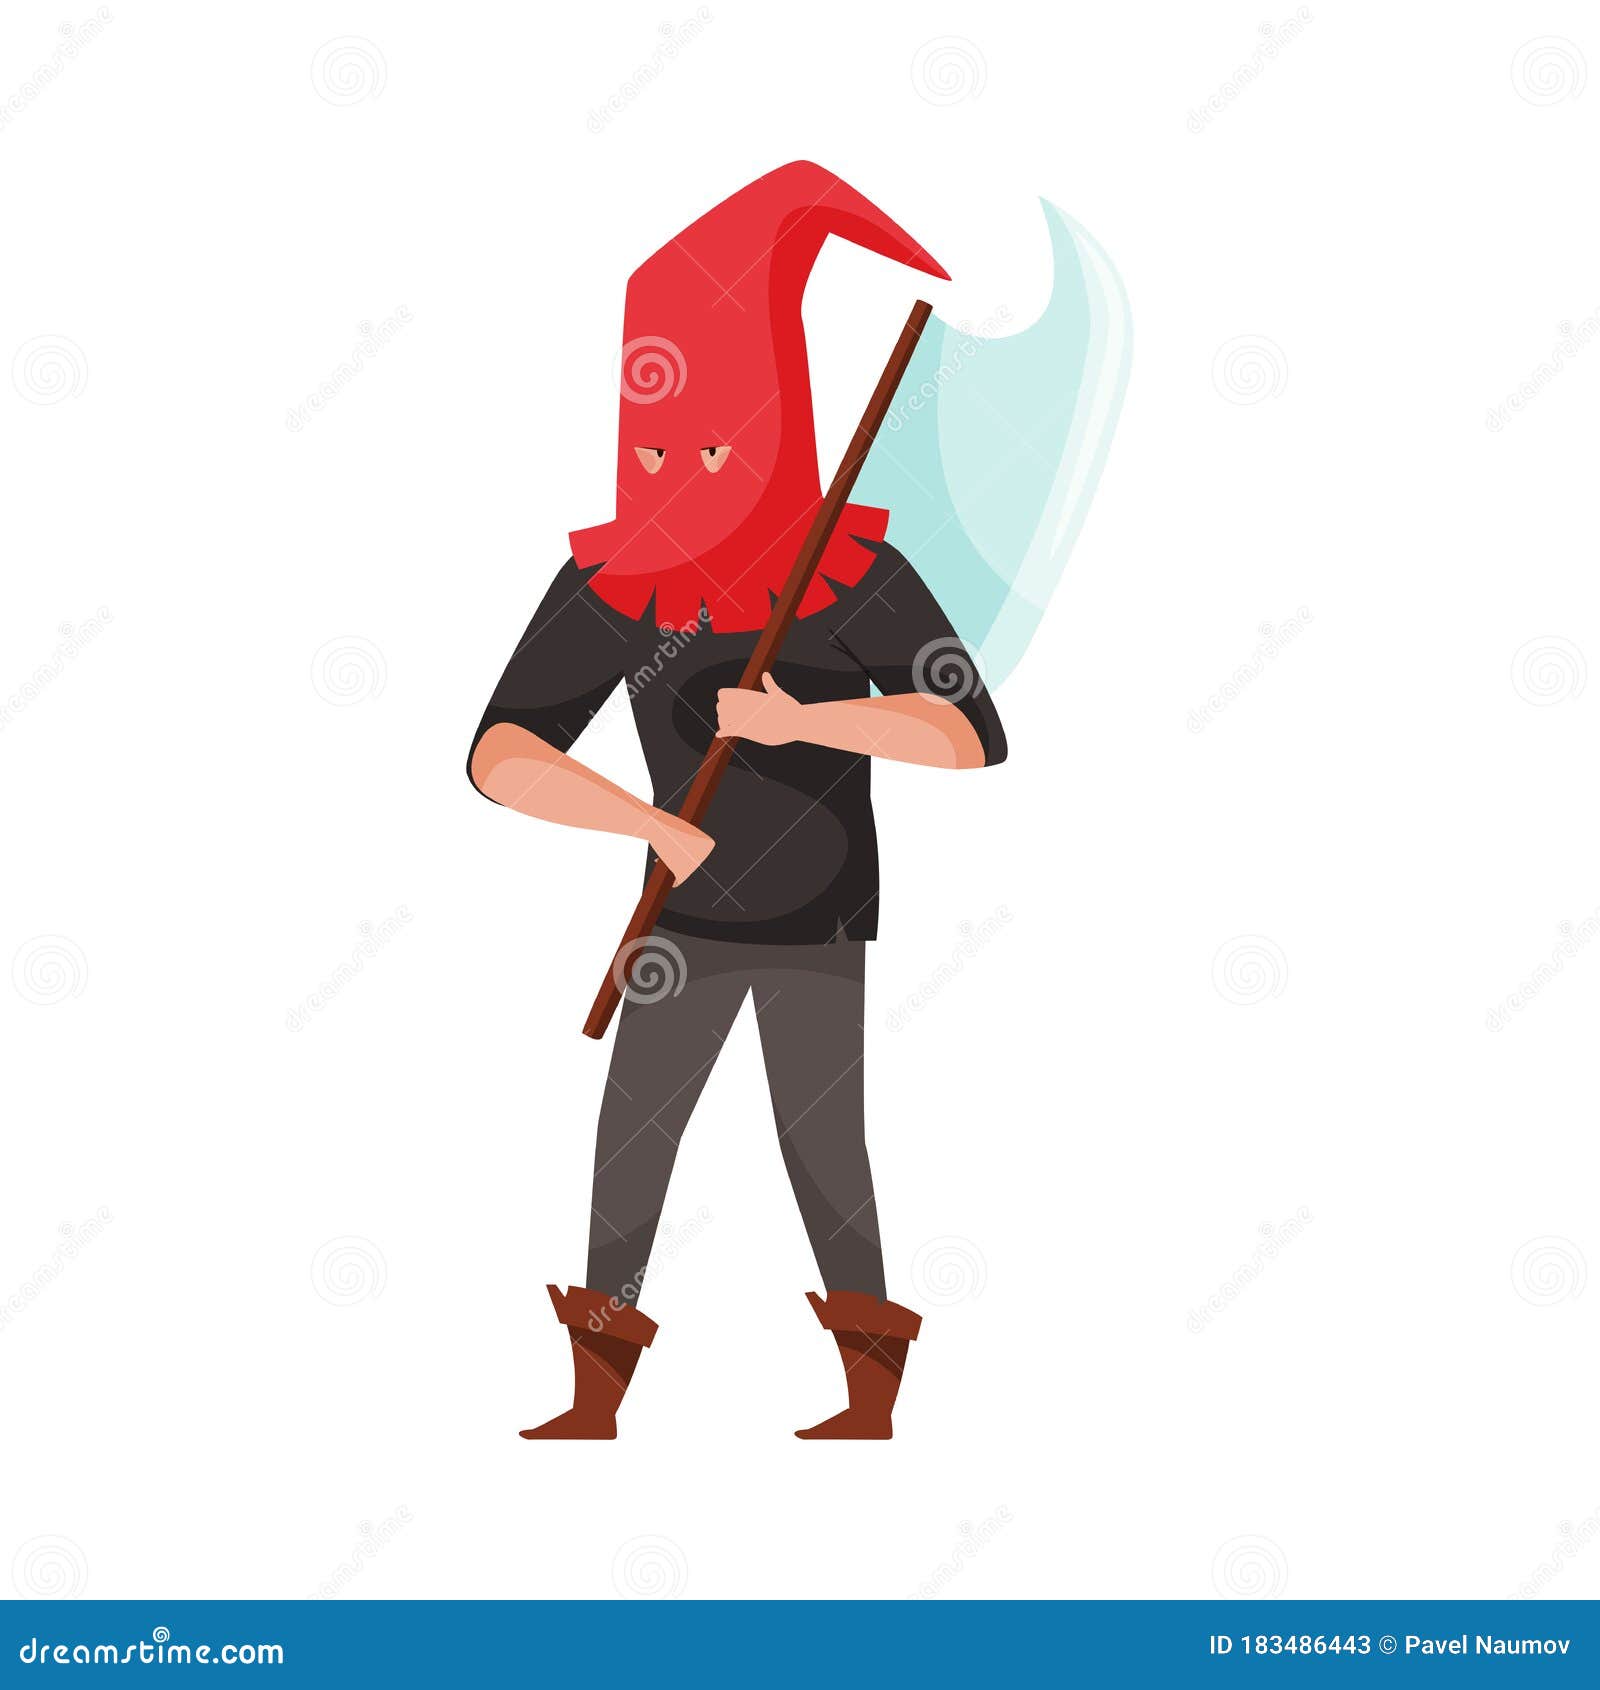 medieval executor or headman wearing red hat and carrying sharp axe  